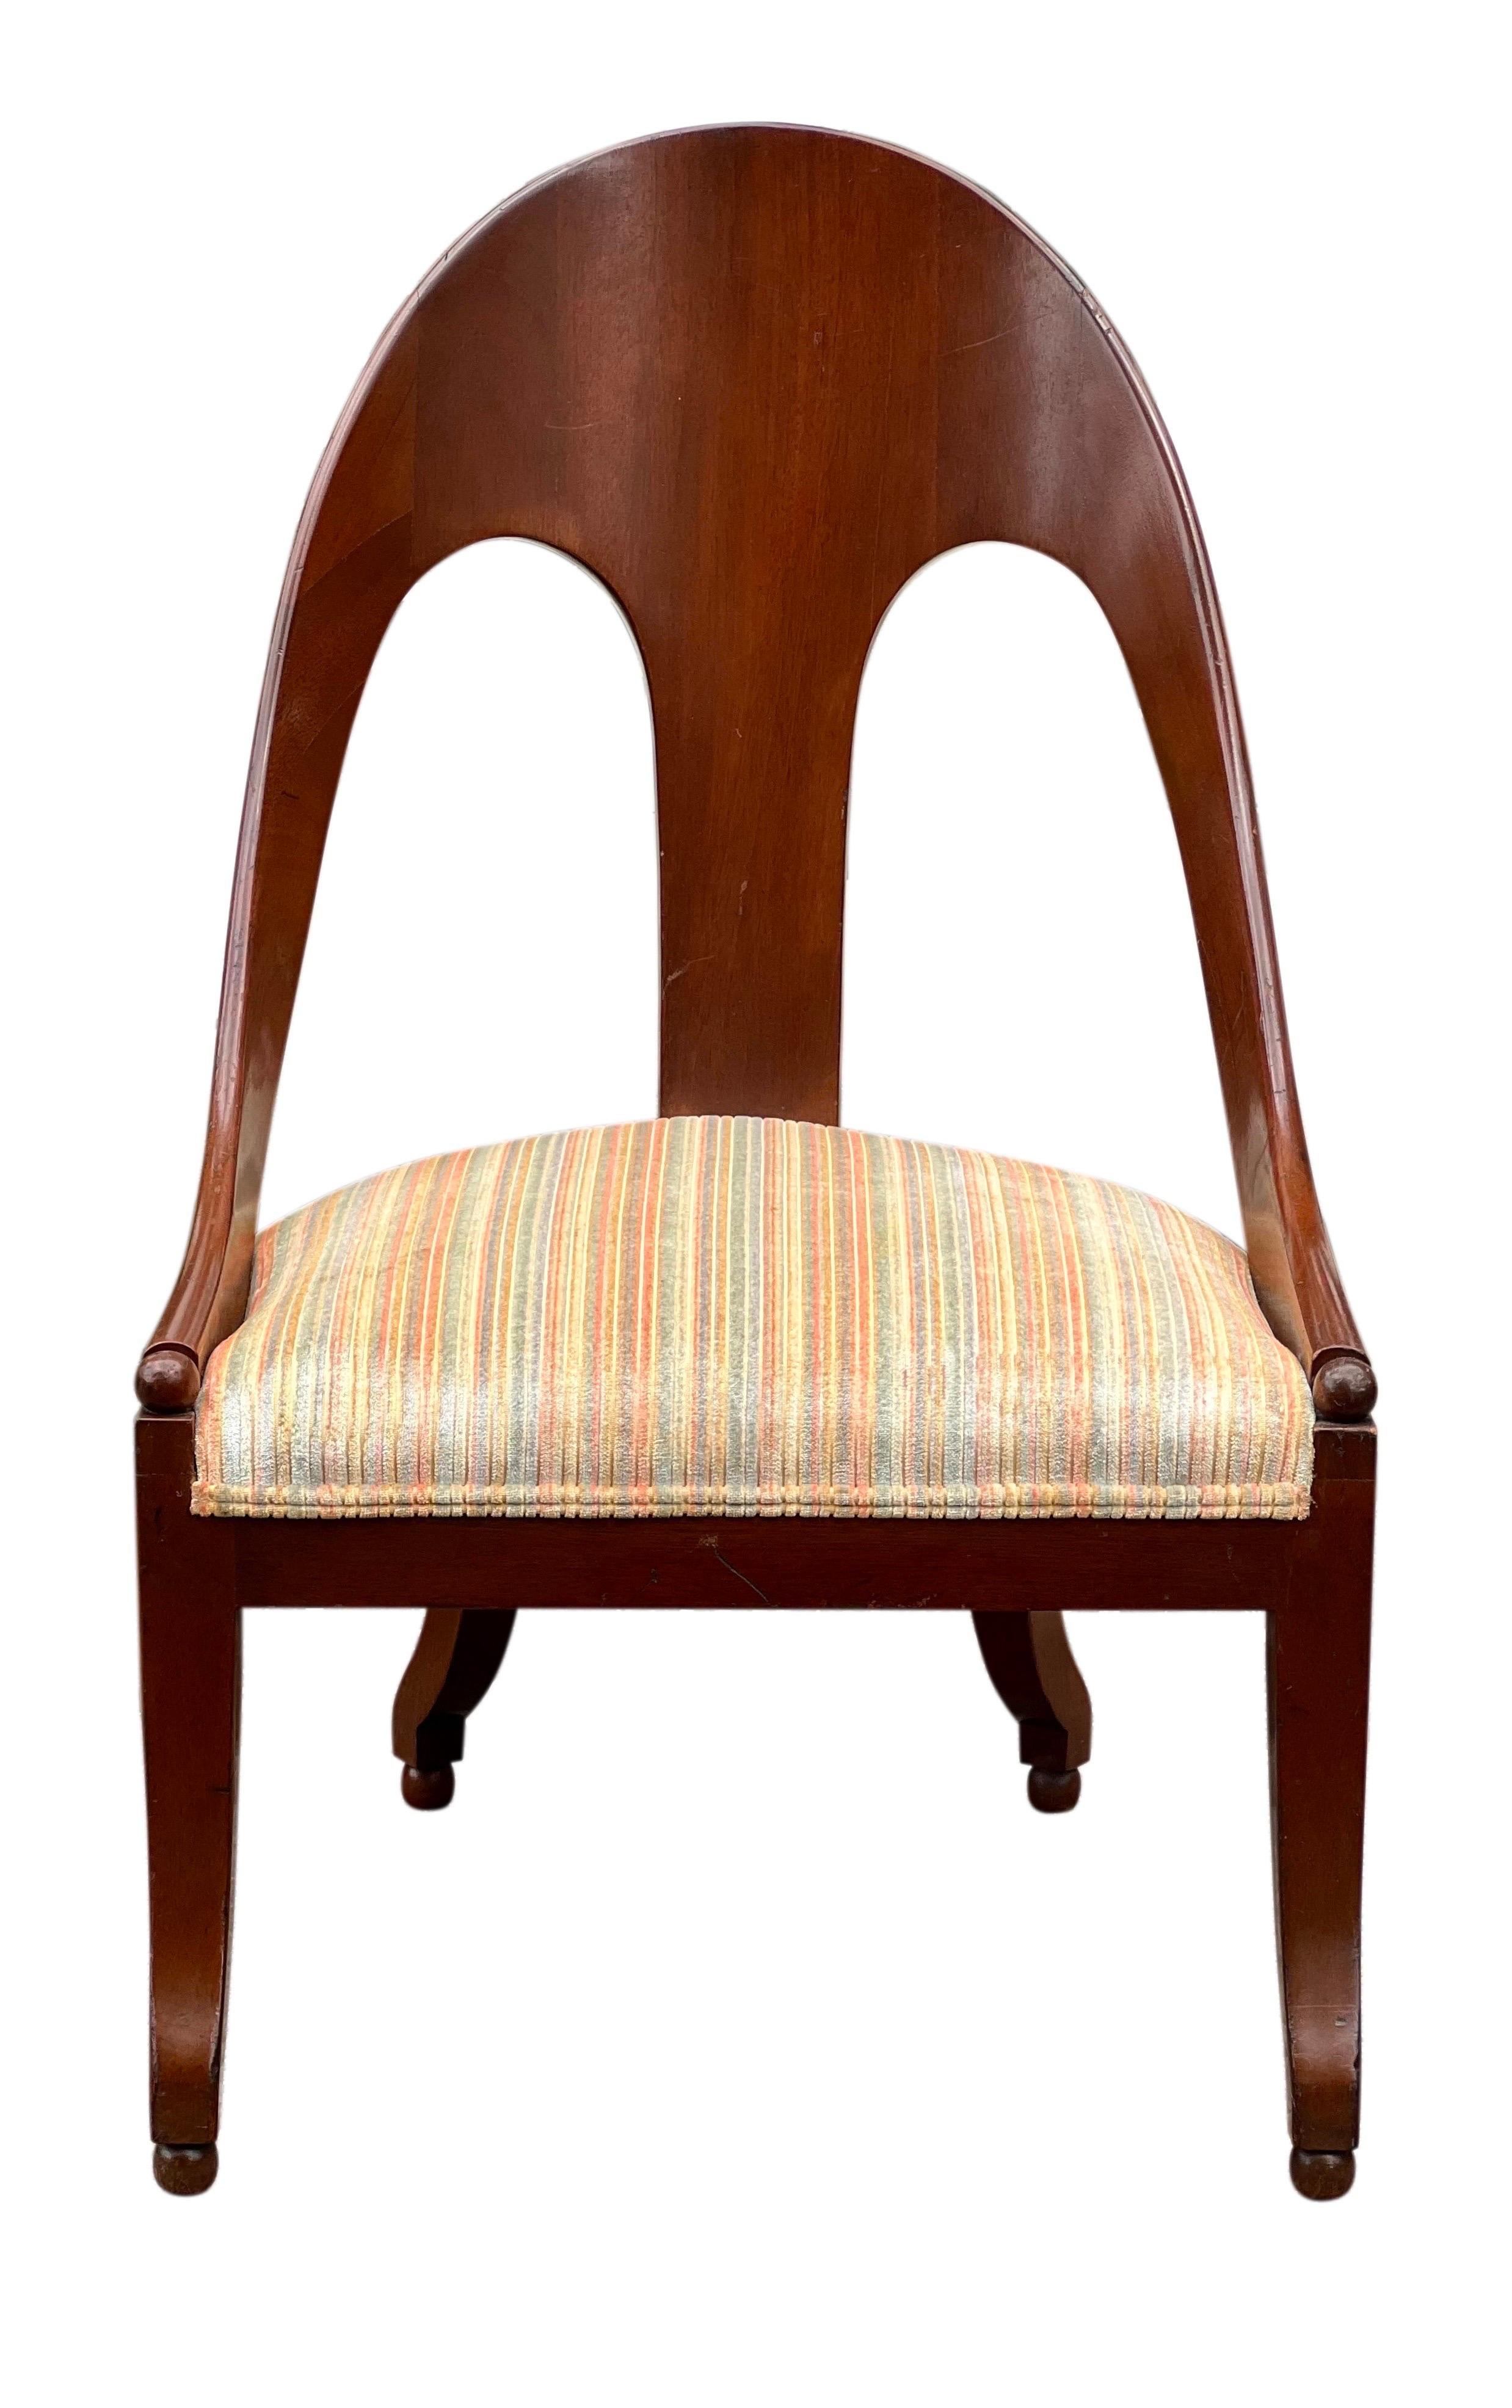 Mid century spoon back mahogany slipper lounge chair attributed to Michael Taylor for Baker, 1950's.

Elegantly curved chair with a mahogany frame in a refined and comfortable spoon back design accentuated with ball feet and arm detail. Upholstery